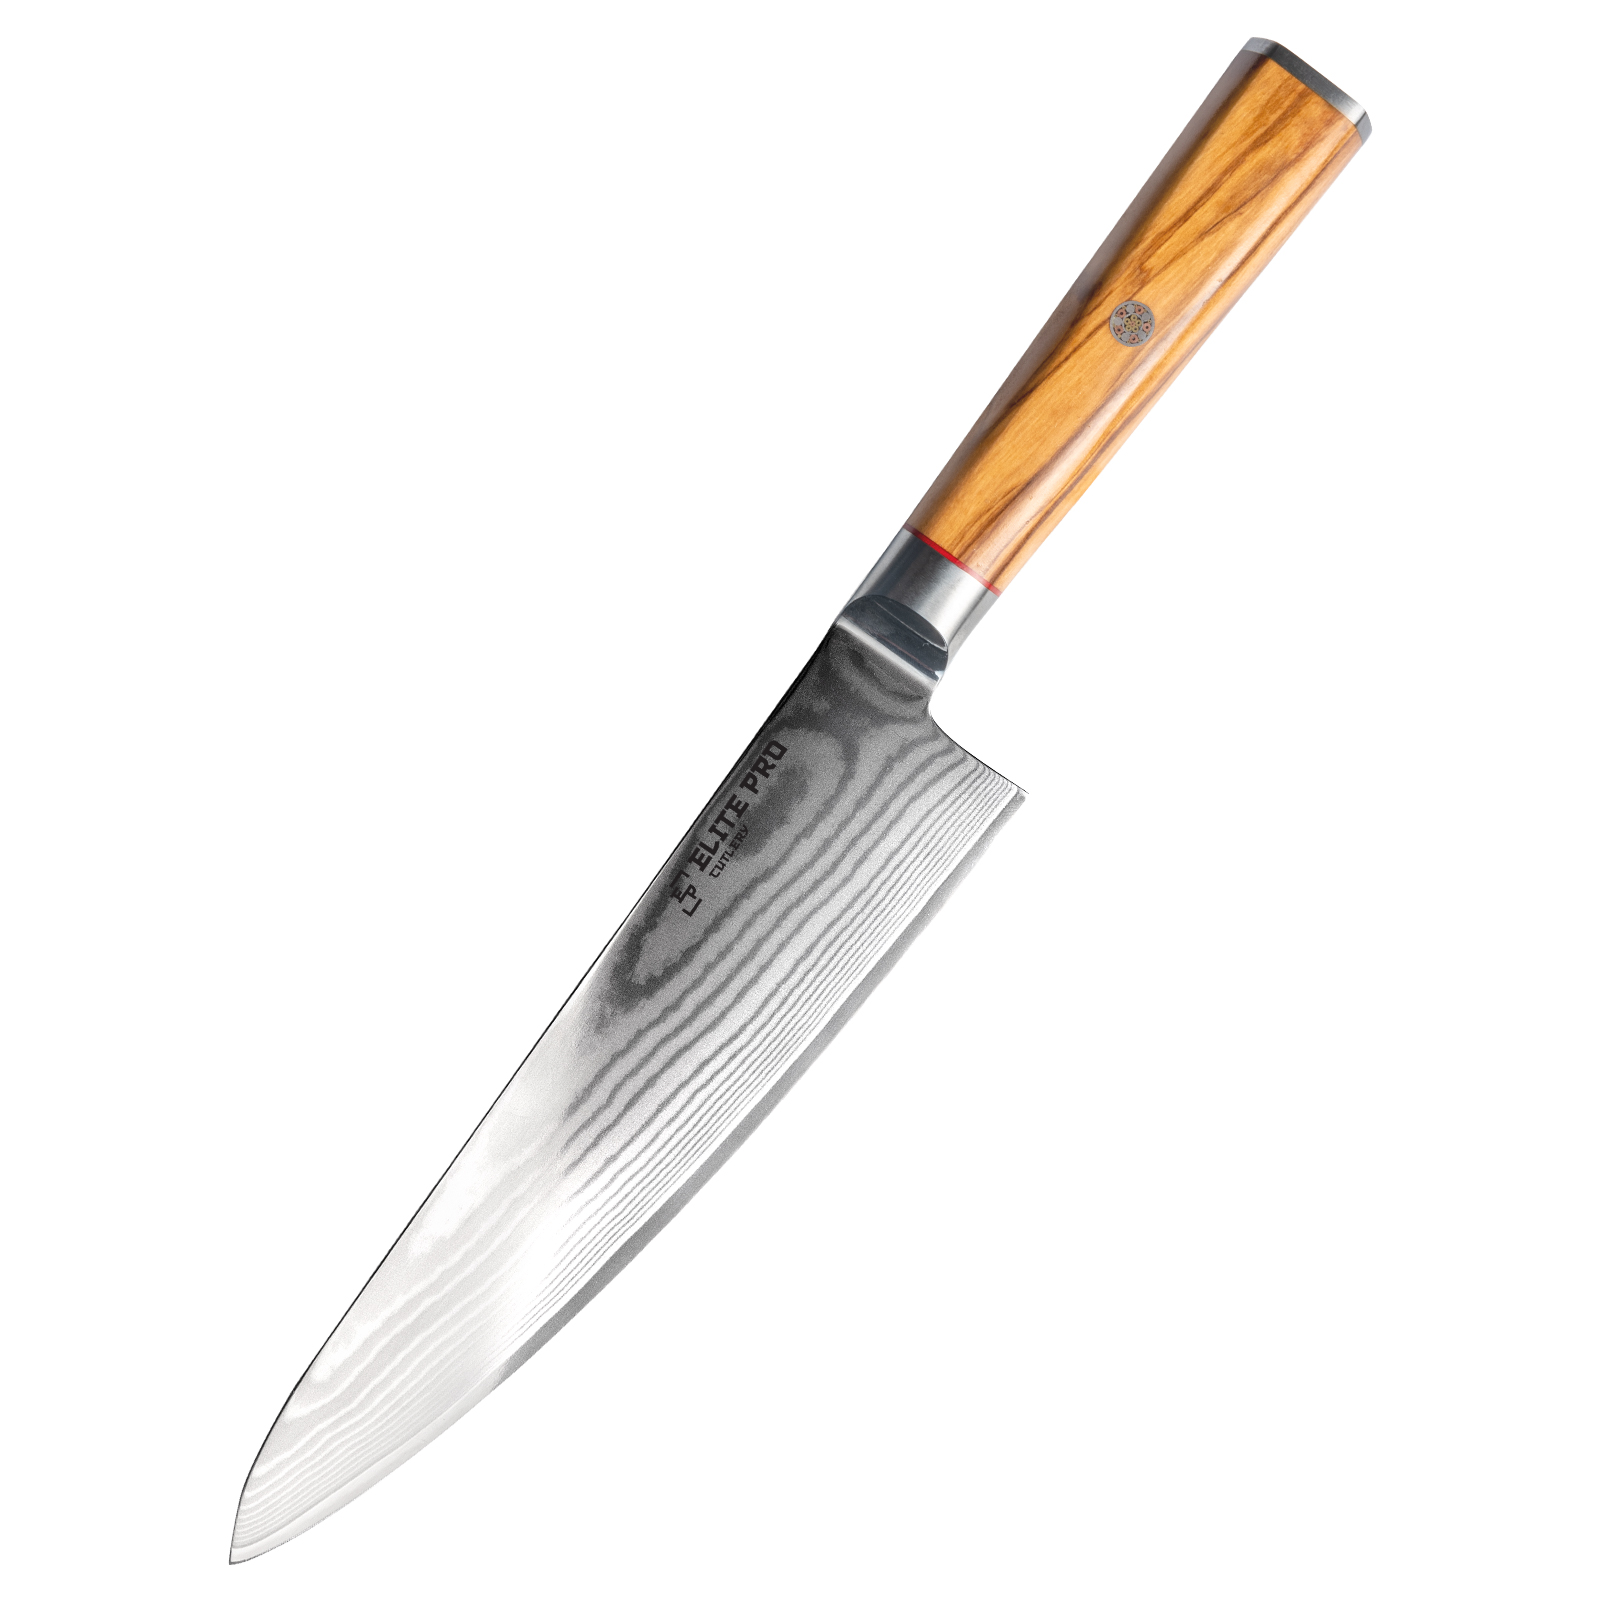 Elite Pro Cutlery Professional Kitchen Knives made with Italy Olive Wood Handle